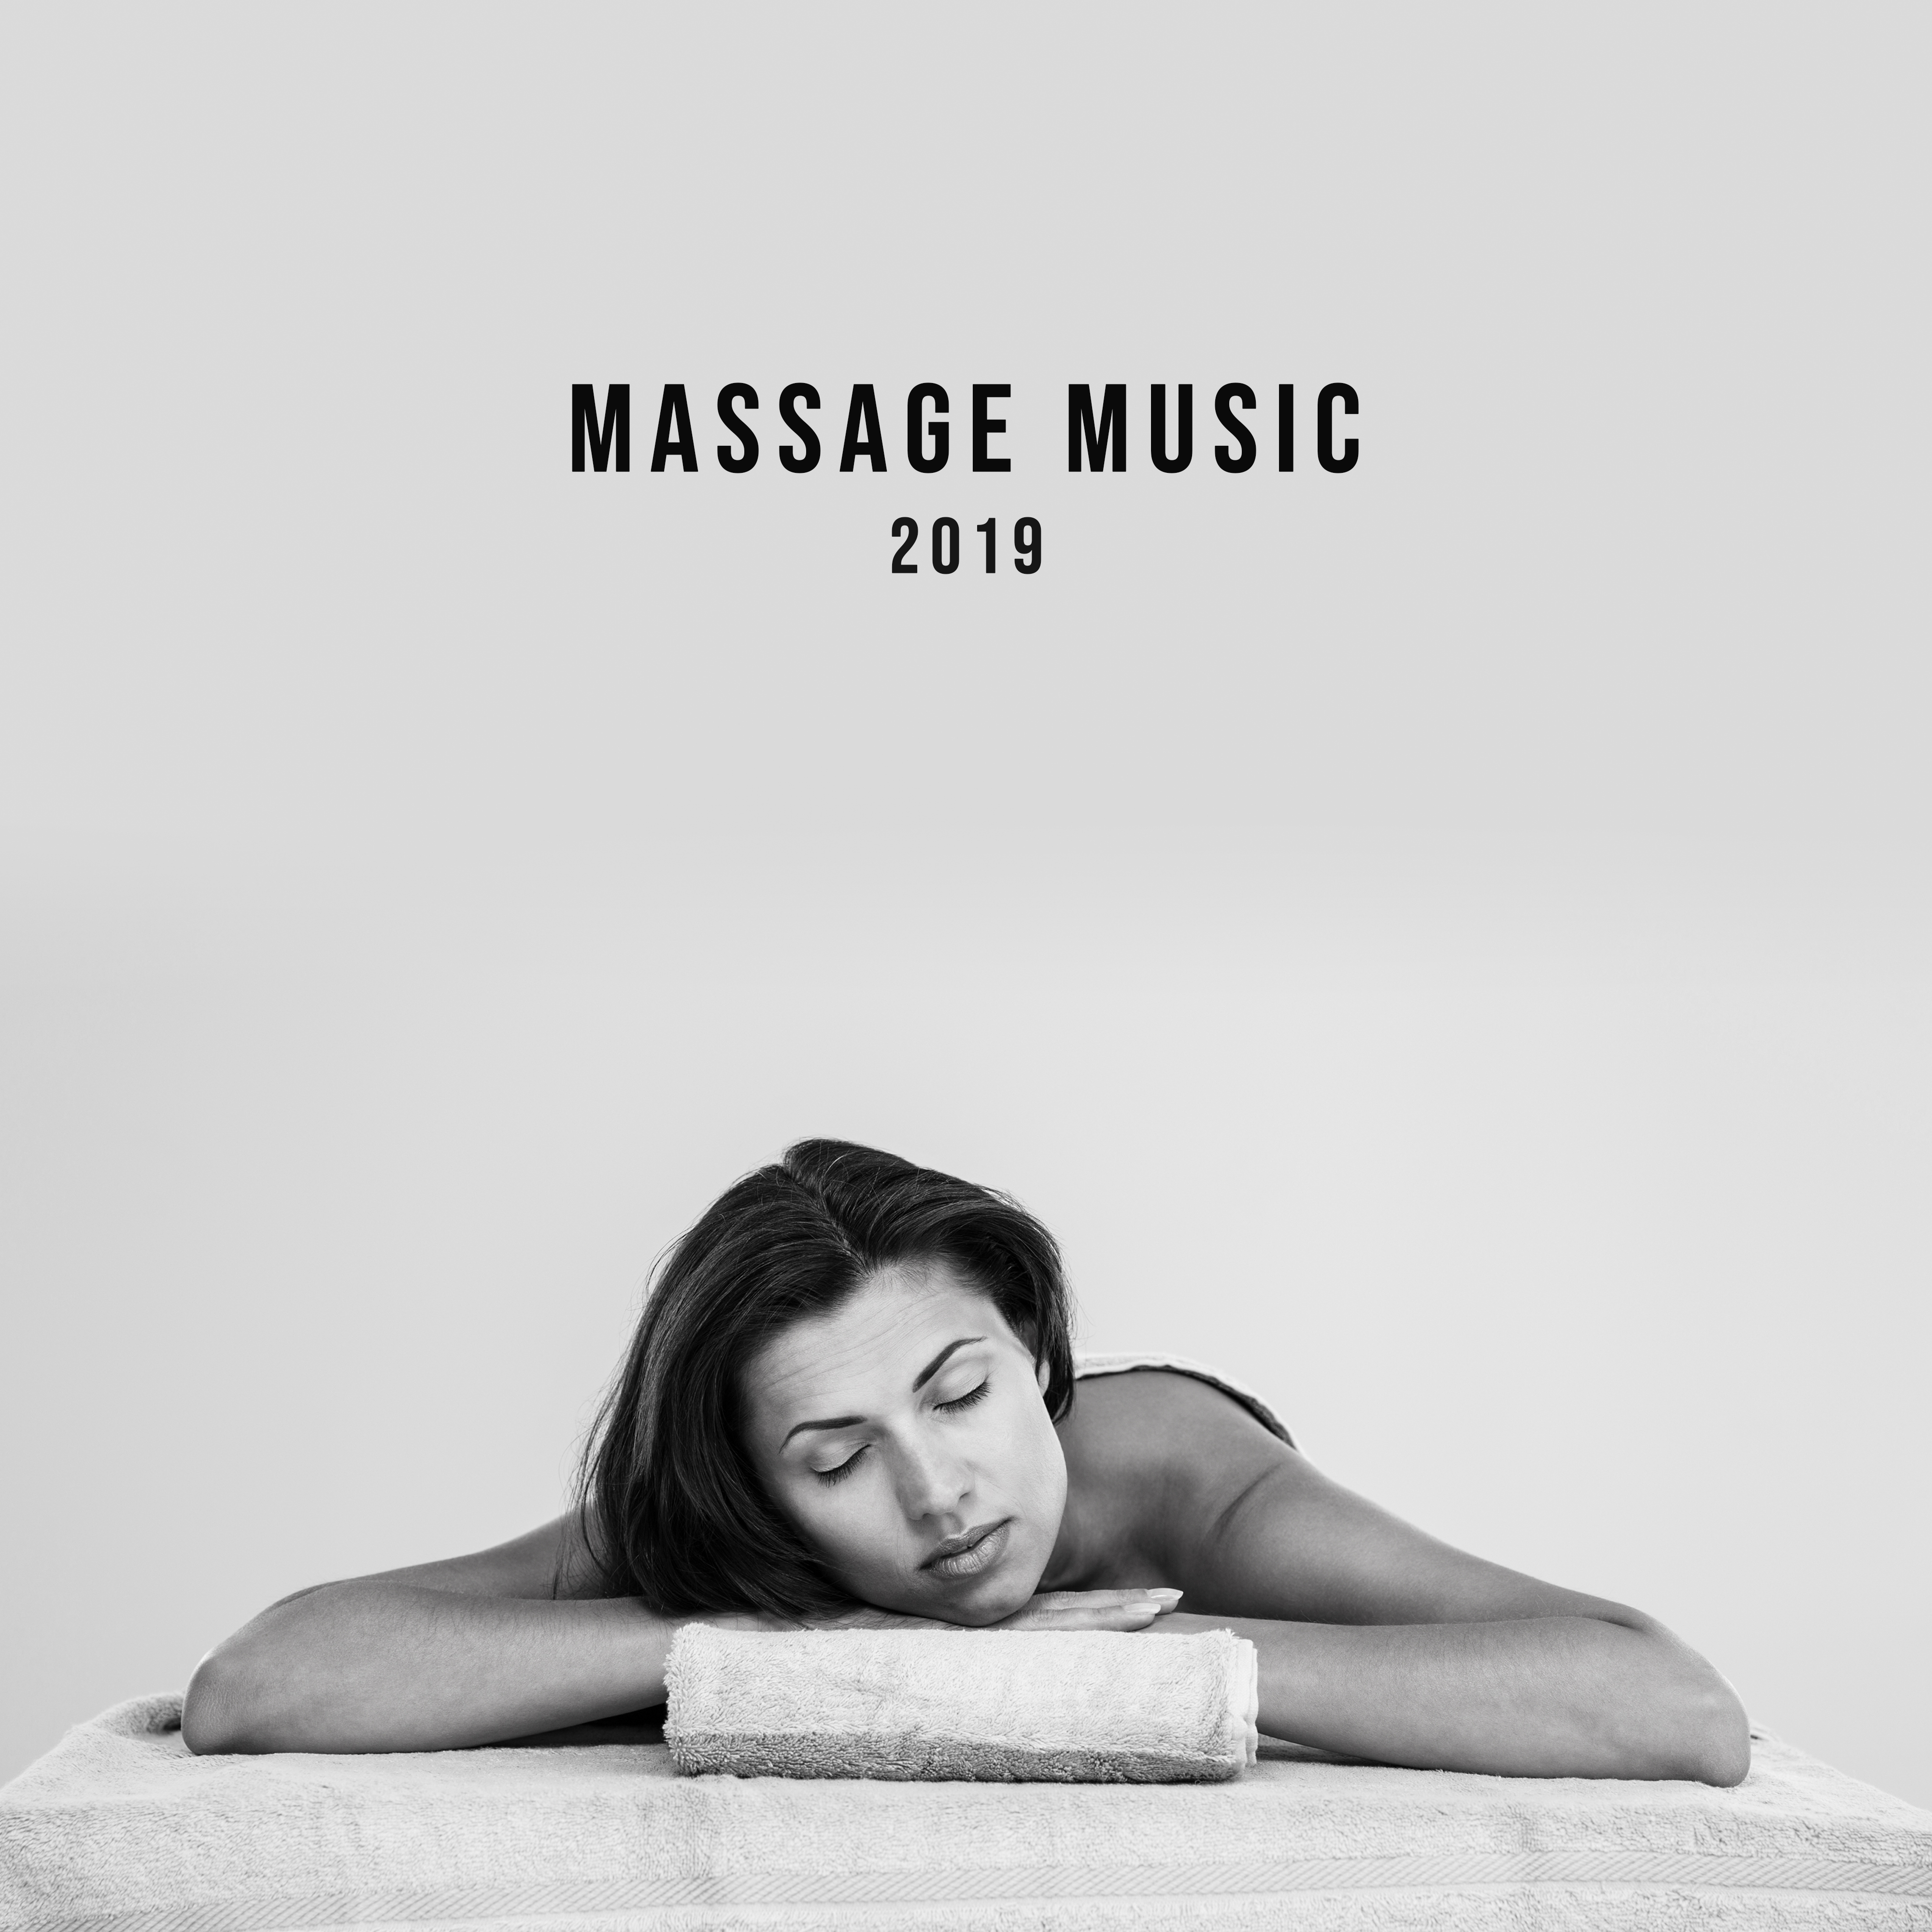 Massage Music 2019 – Spa Songs, Relaxing Music Therapy, Peaceful Melodies for Spa, Relaxation, Wellness, Relaxing Spa, Pure Relaxation